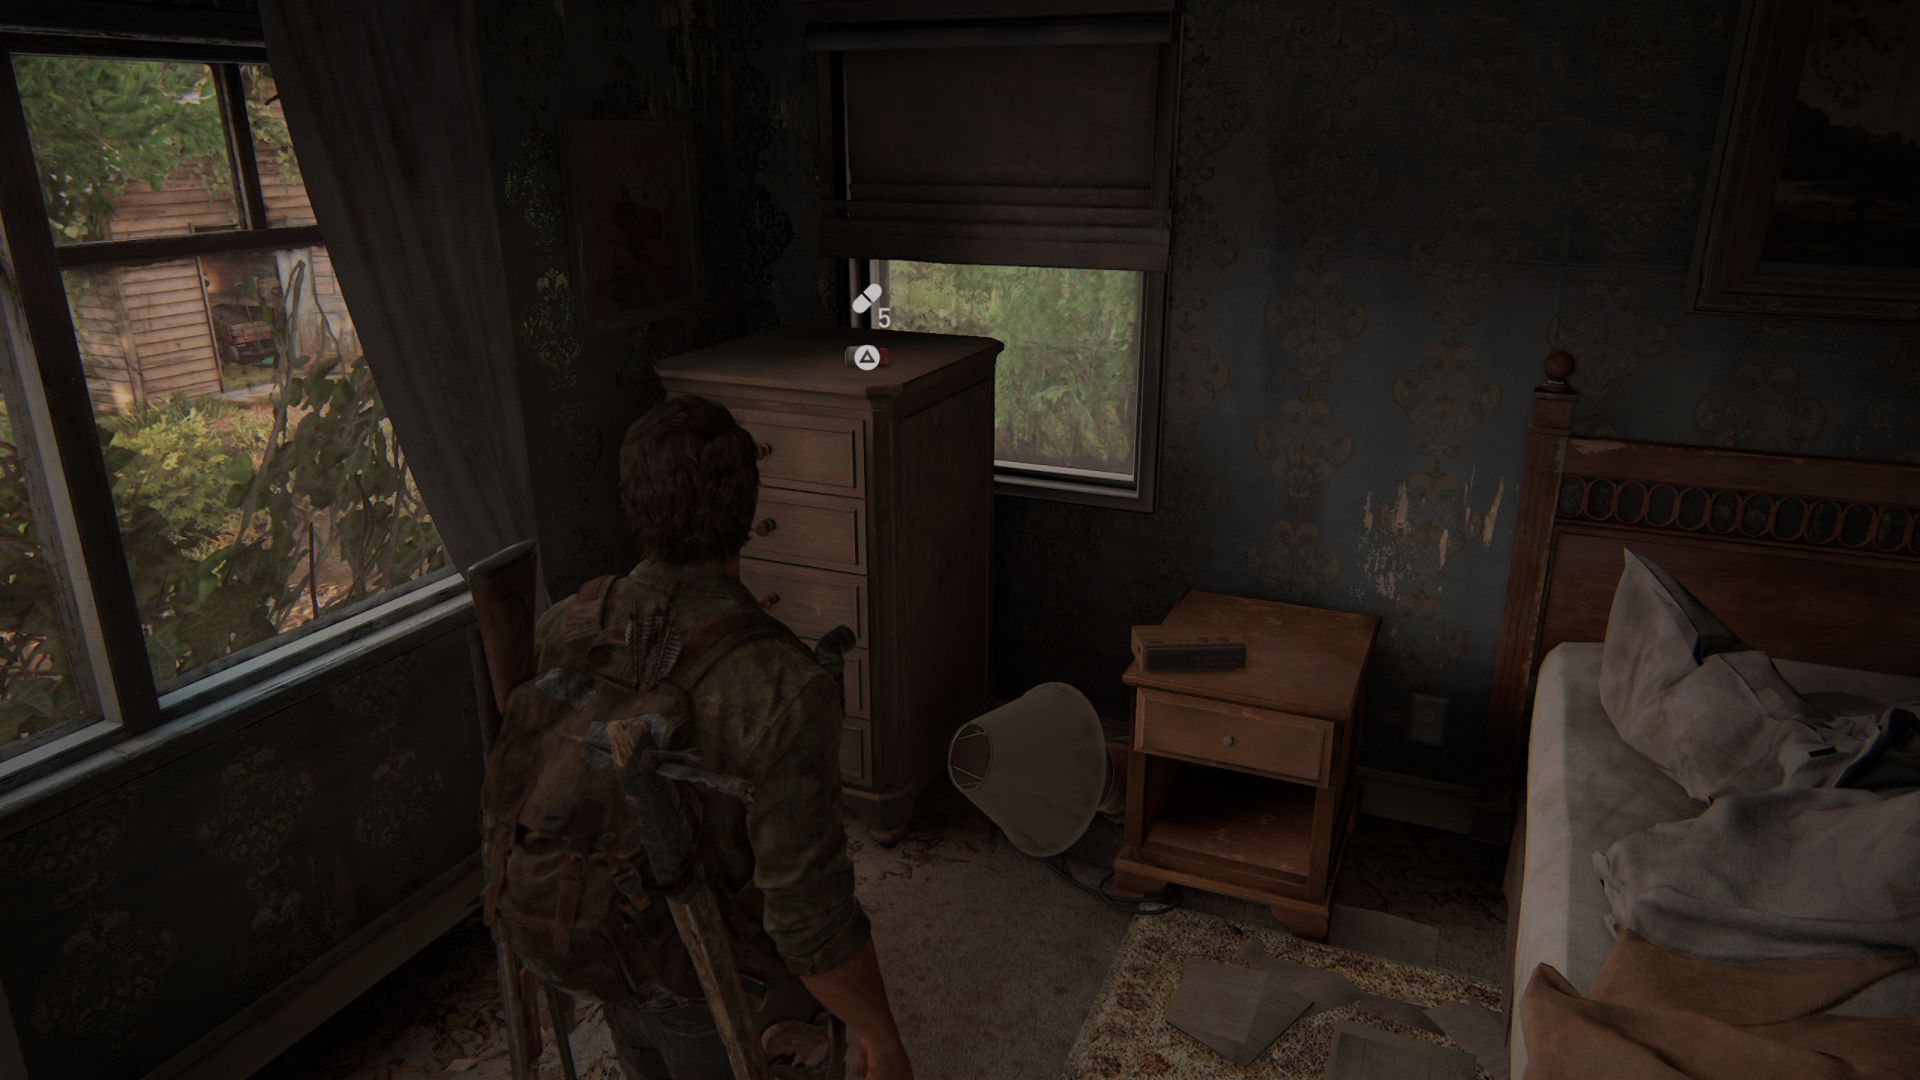 The Last of Us Part 1 Remake Bill's Town Collectible Locations: Joel can be seen looking at the collectible location